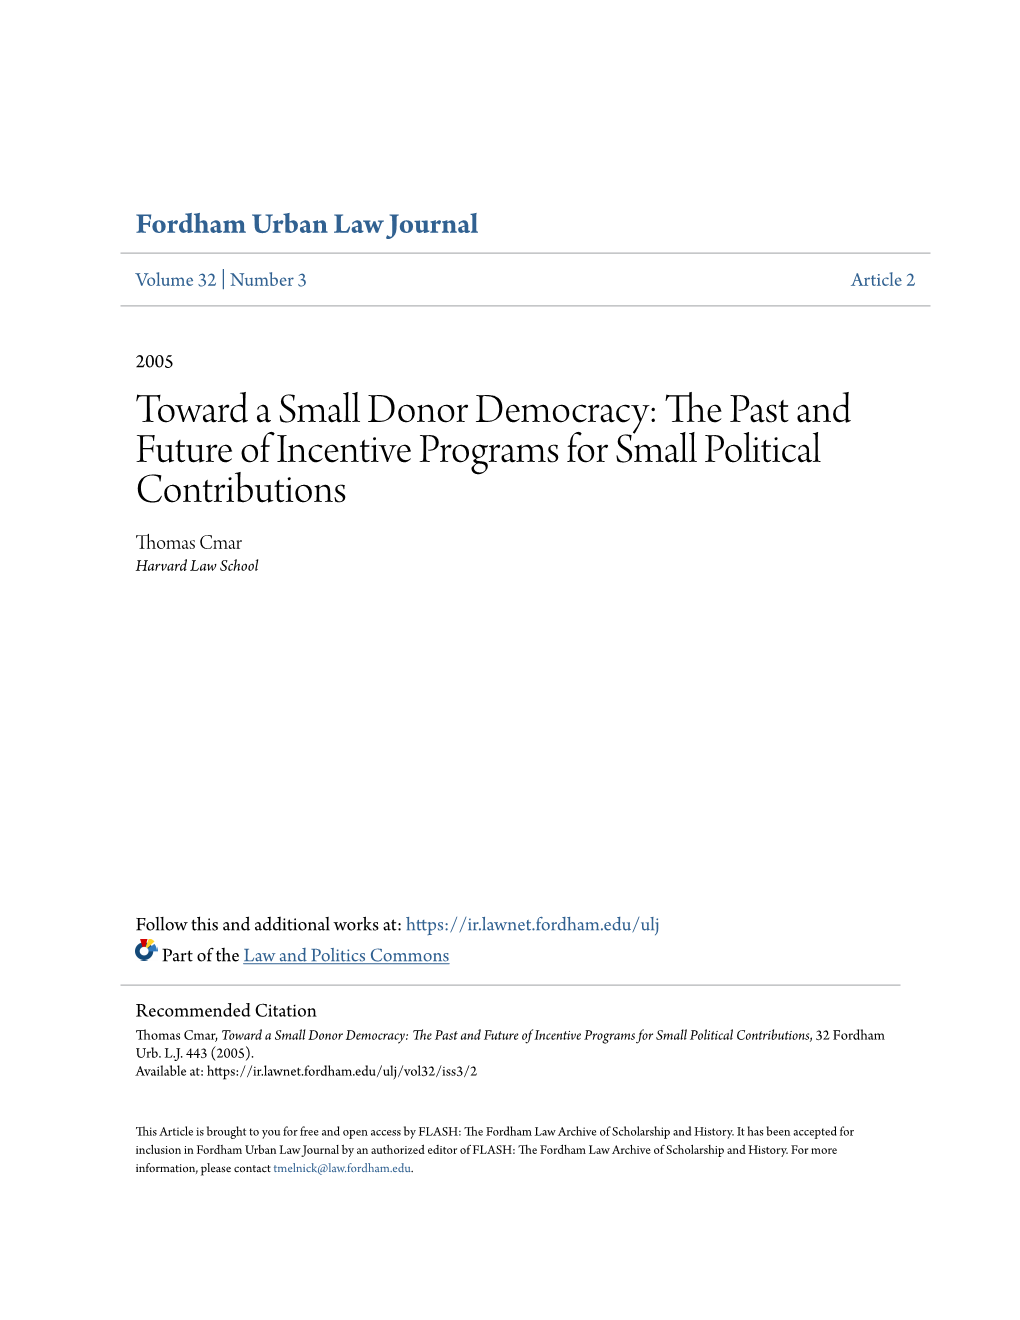 The Past and Future of Incentive Programs for Small Political Contributions, 32 Fordham Urb